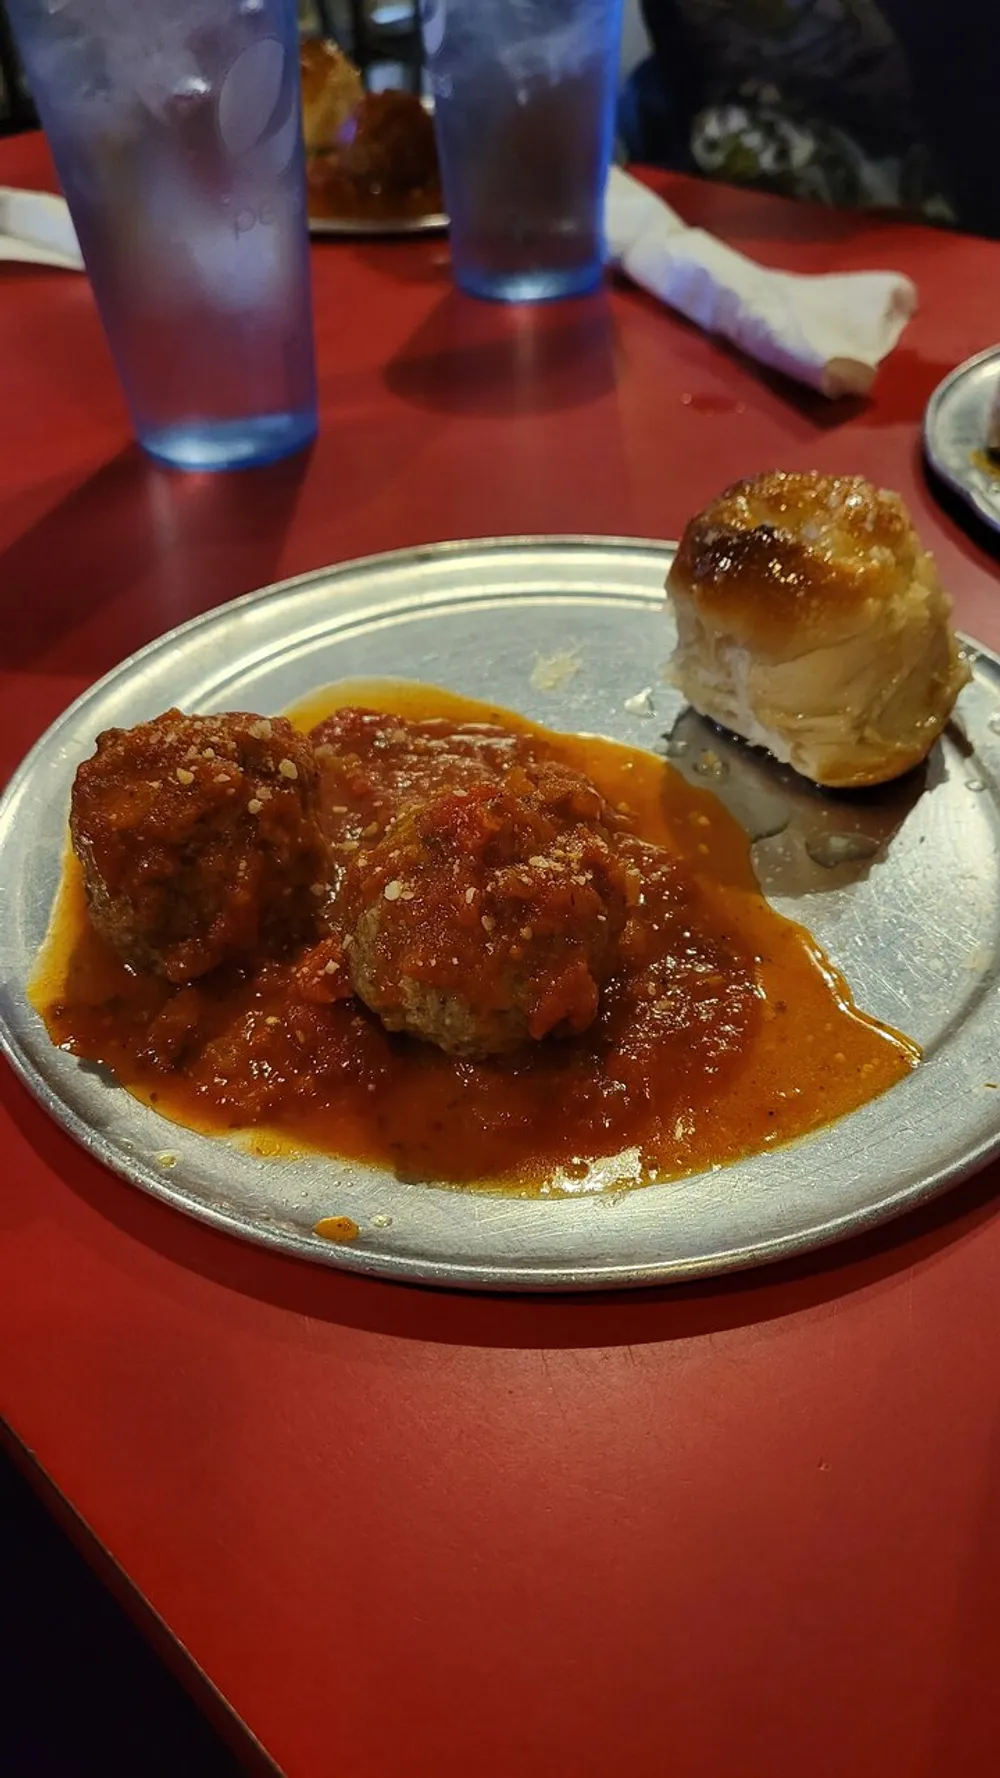 The image shows a plate with two meatballs covered in tomato sauce and sprinkled with grated cheese accompanied by a piece of bread on a table with a red surface and two glasses of water in the background